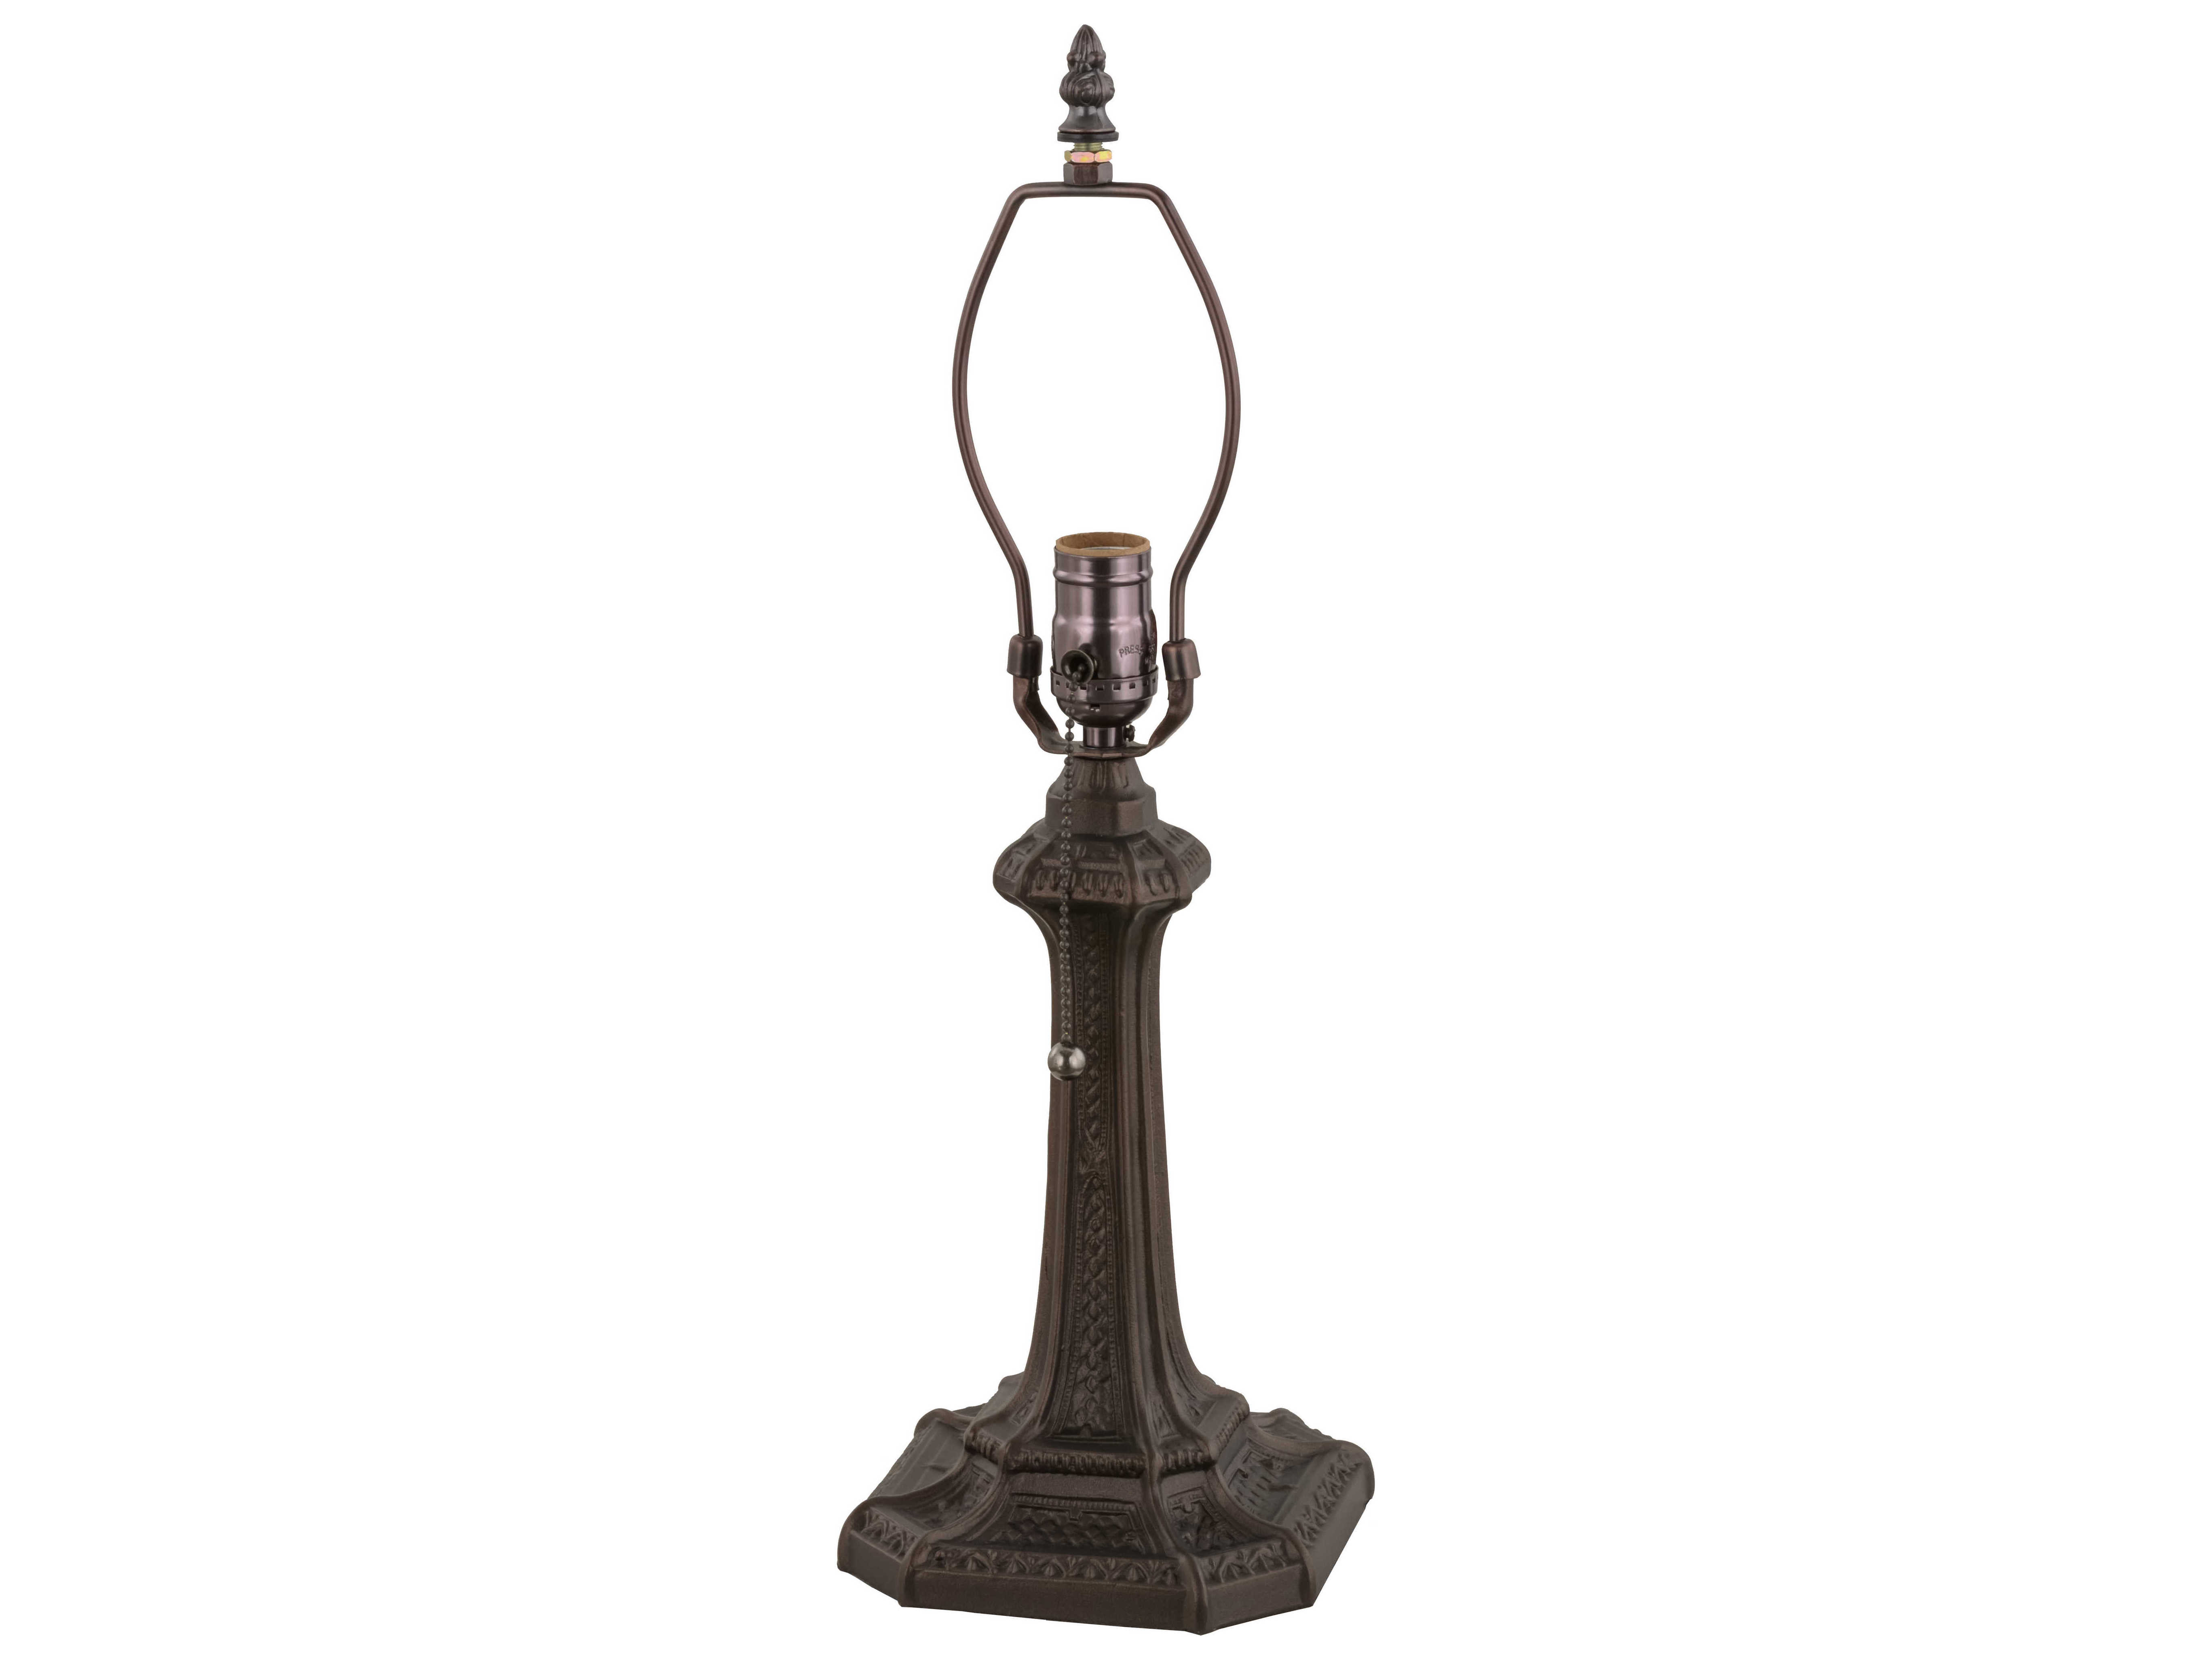 Meyda Gothic Bronze Table Lamp, Black Gothic Table Lamps